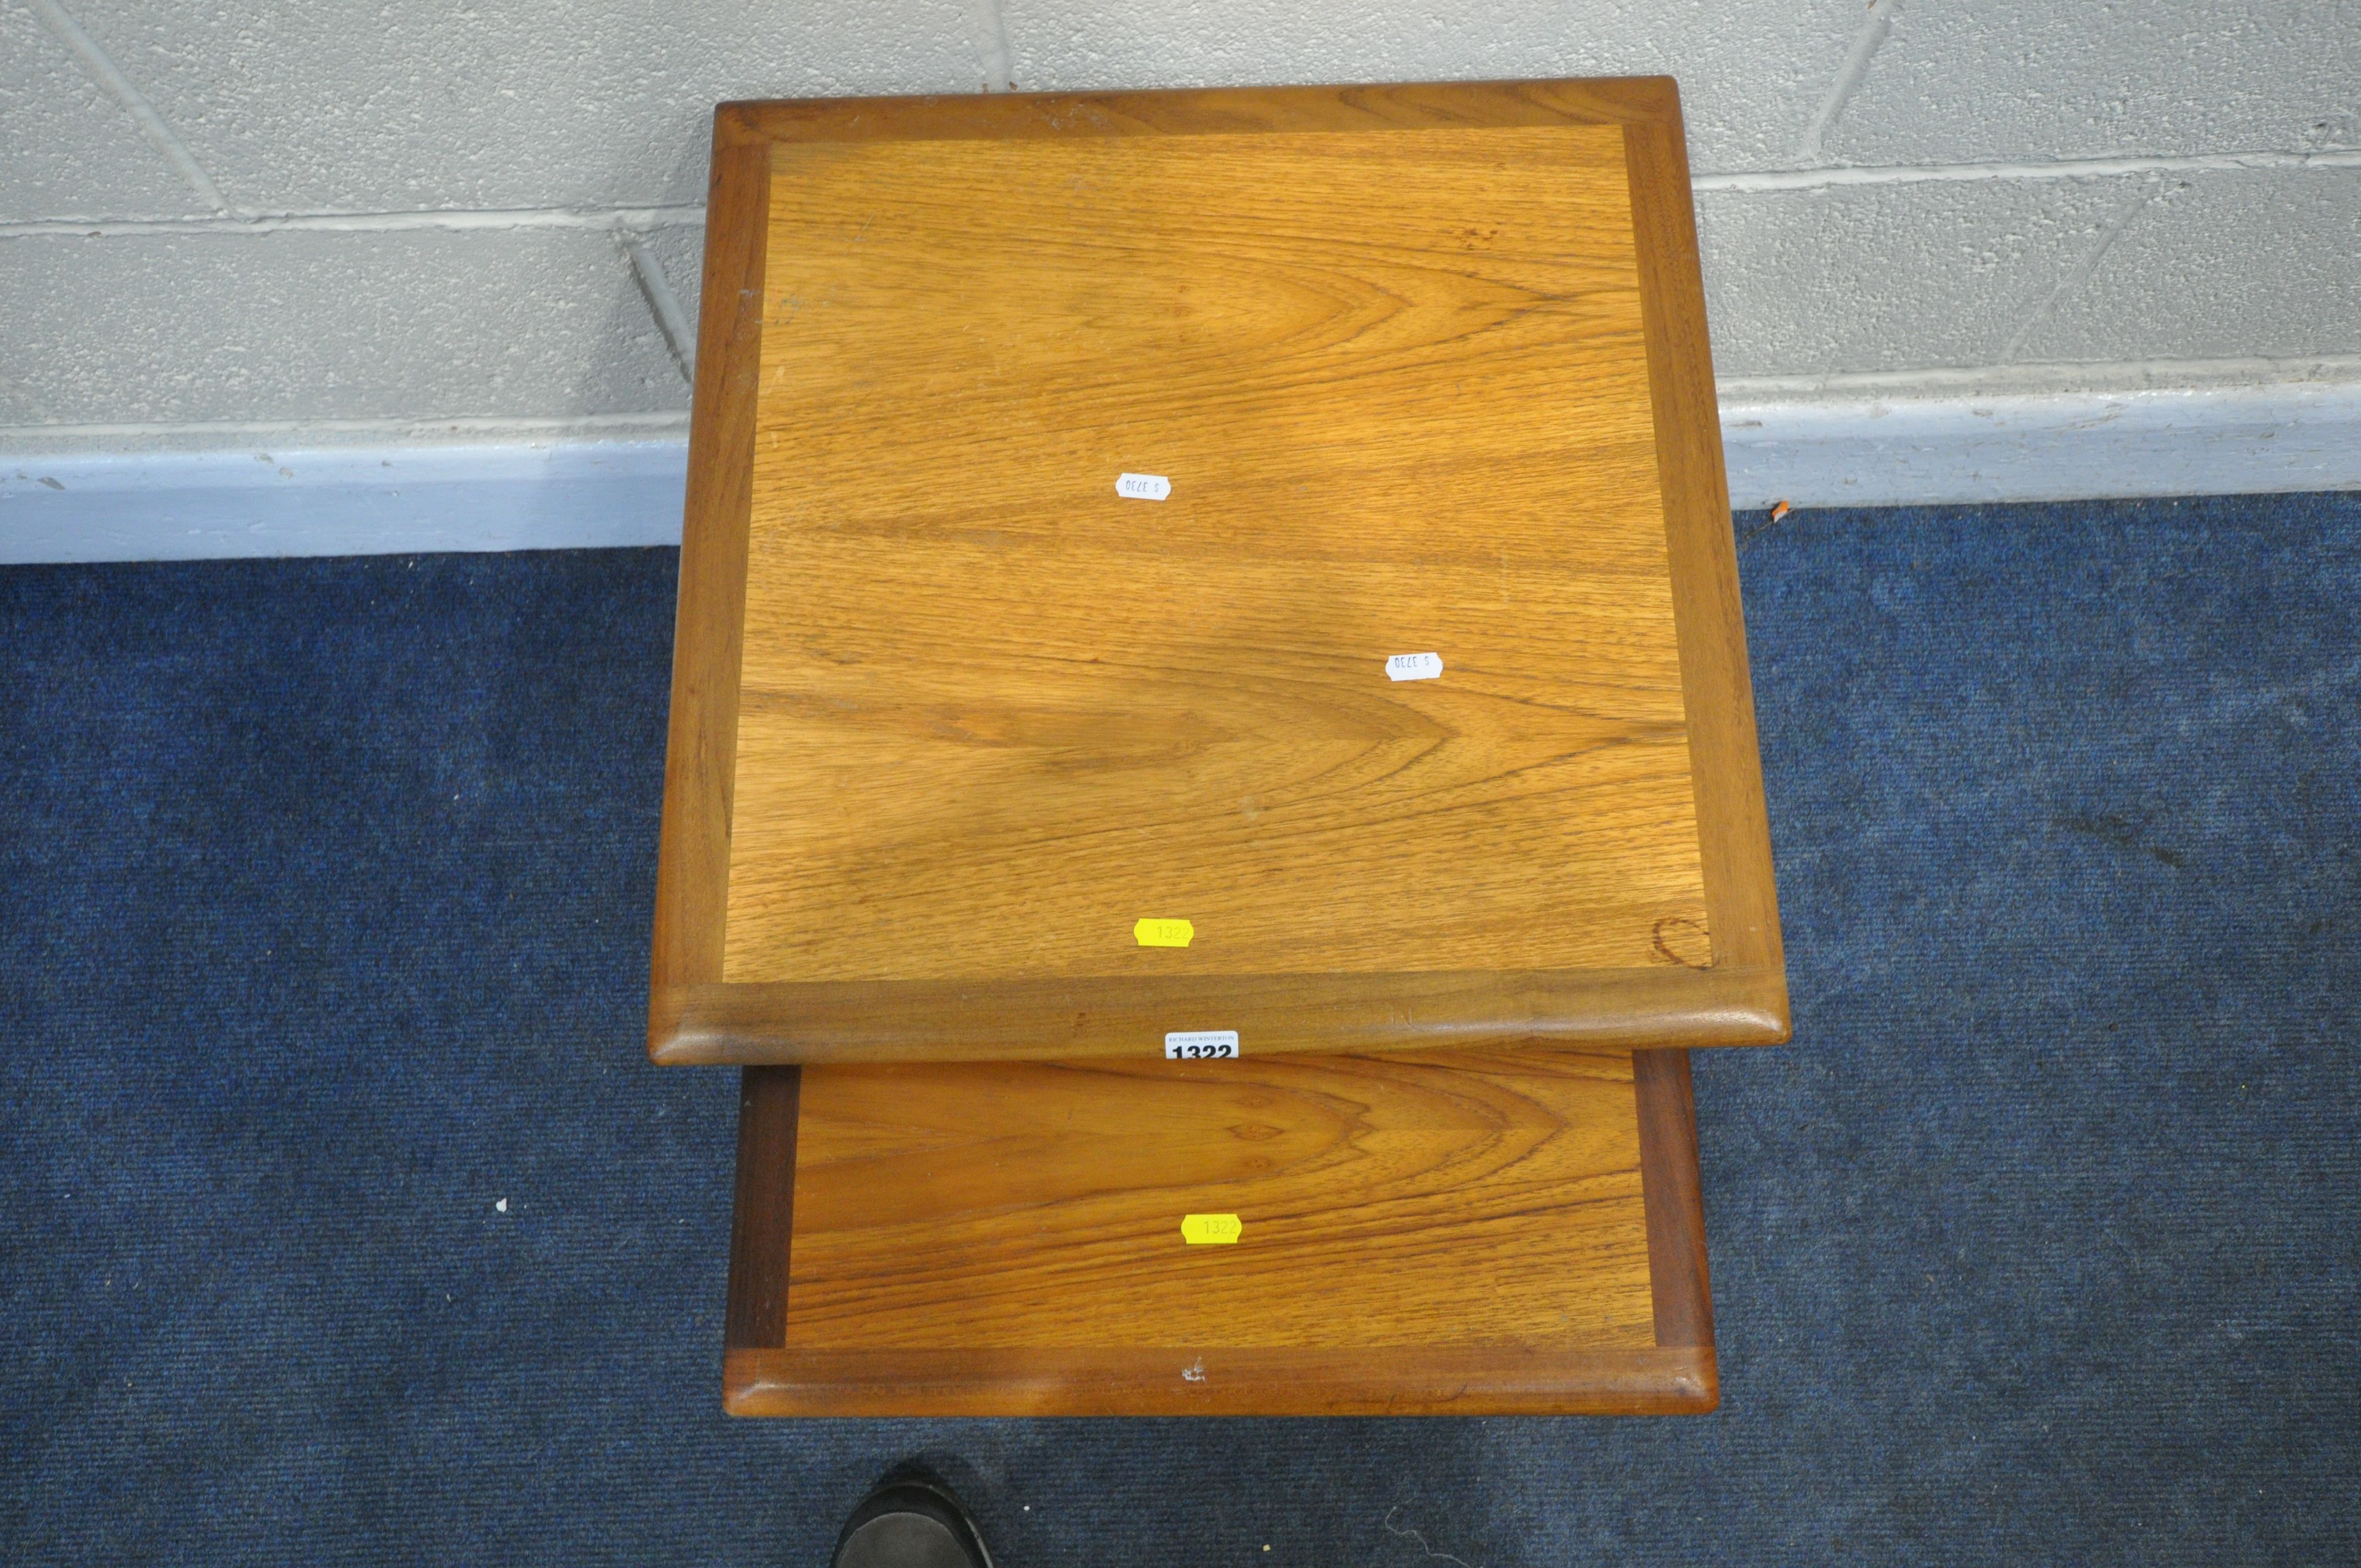 A MID CENTURY NEST OF TWO TABLES, largest 50cm cubed (condition - surface marks and stains) - Image 2 of 3